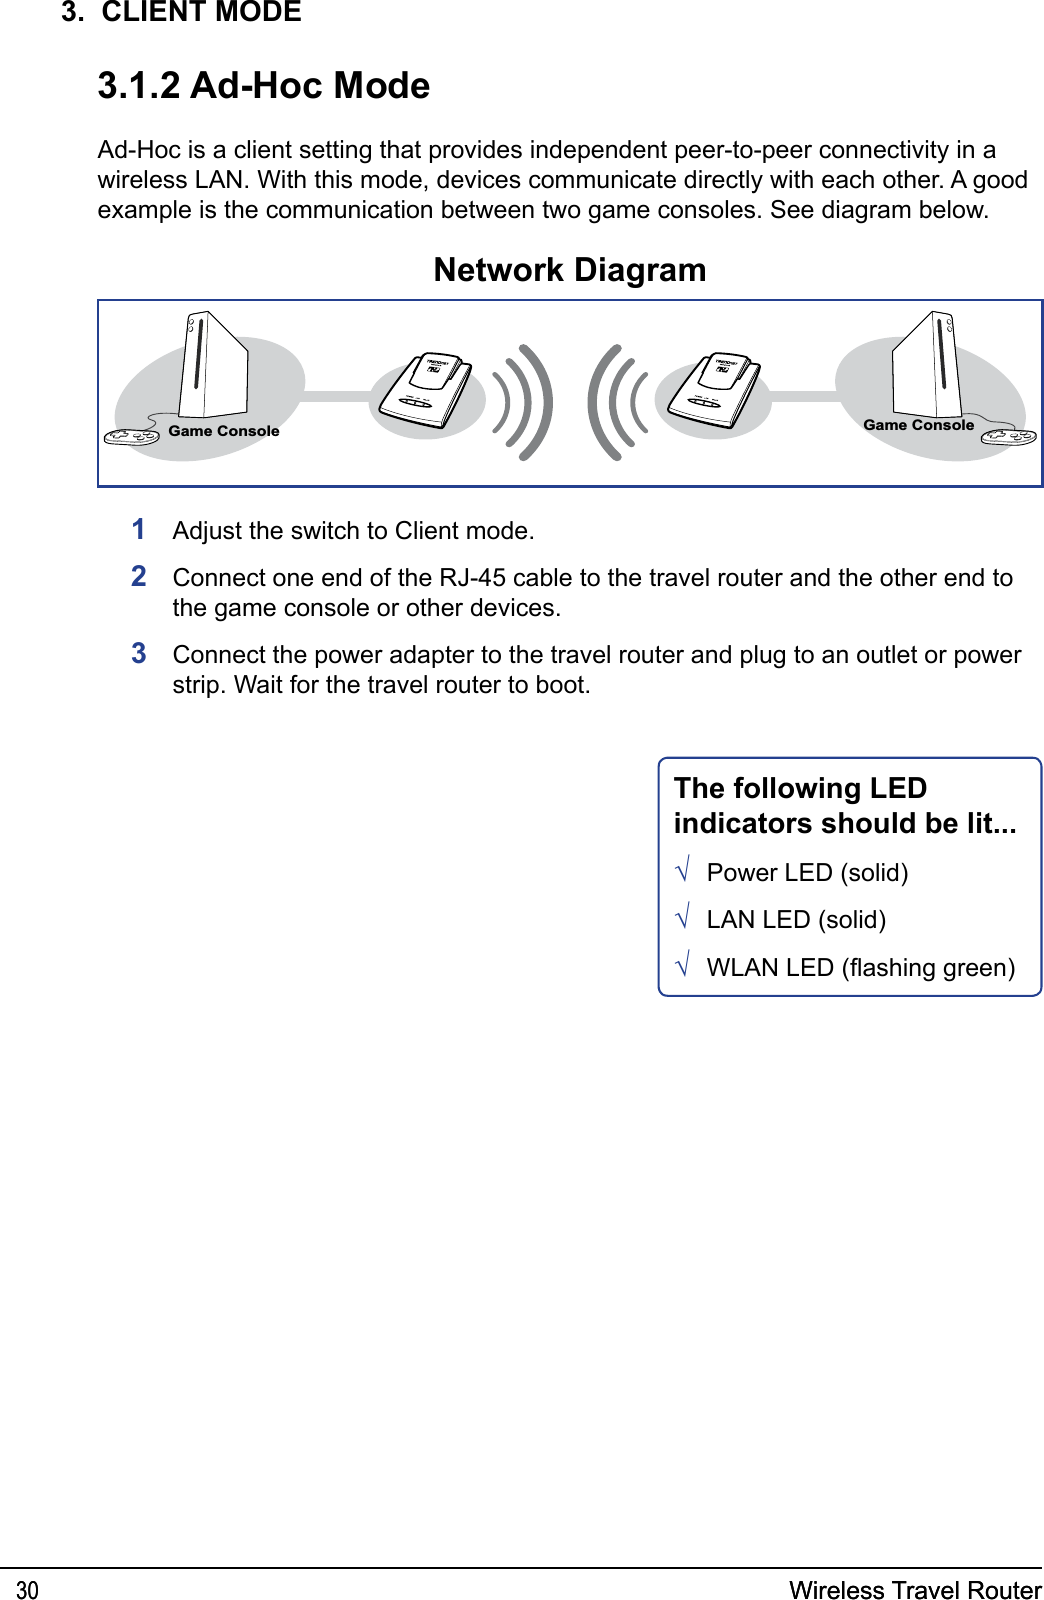 Wireless Travel Router30 Wireless Travel Router303.  CLIENT MODE3.1.2 Ad-Hoc ModeAd-Hoc is a client setting that provides independent peer-to-peer connectivity in a wireless LAN. With this mode, devices communicate directly with each other. A good example is the communication between two game consoles. See diagram below.1  Adjust the switch to Client mode. 2  Connect one end of the RJ-45 cable to the travel router and the other end to the game console or other devices.3  Connect the power adapter to the travel router and plug to an outlet or power strip. Wait for the travel router to boot.Network DiagramGame ConsoleGame ConsoleThe following LED indicators should be lit...Power LED (solid)LAN LED (solid)WLAN LED (ashing green)√√√